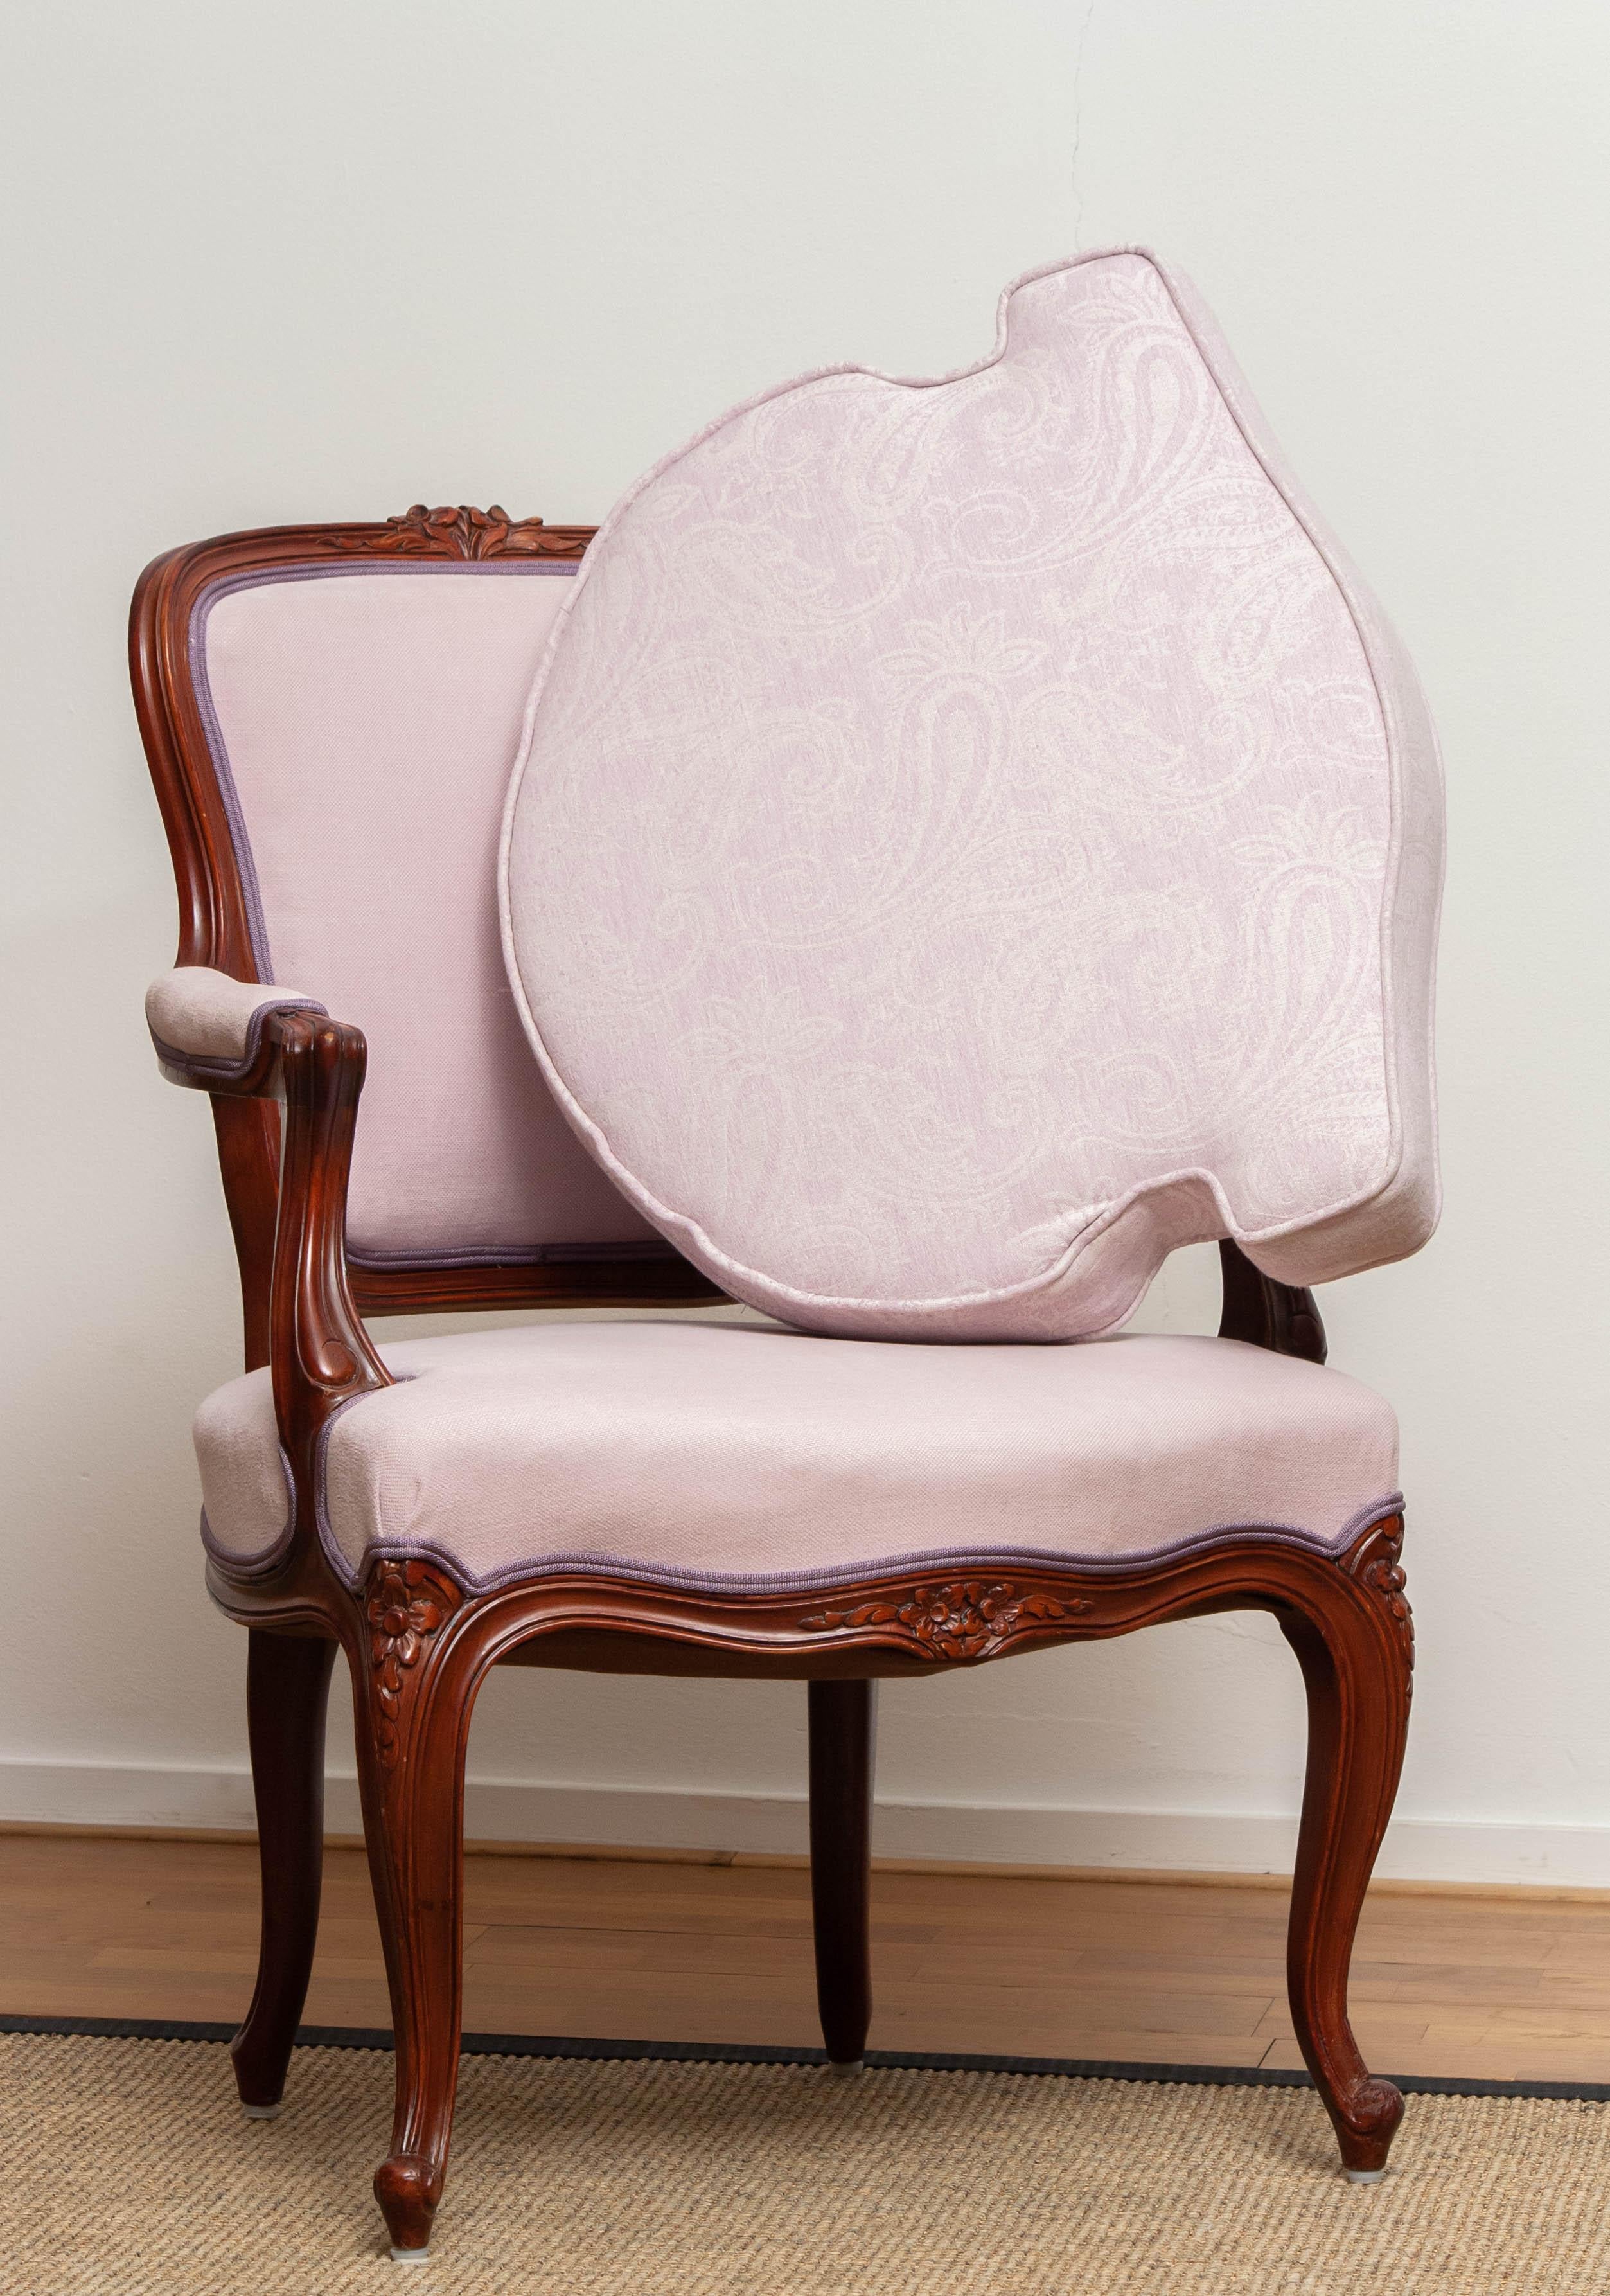 1950s, Pink Swedish Rococo Bergères in the Shabby Chic Technique 2